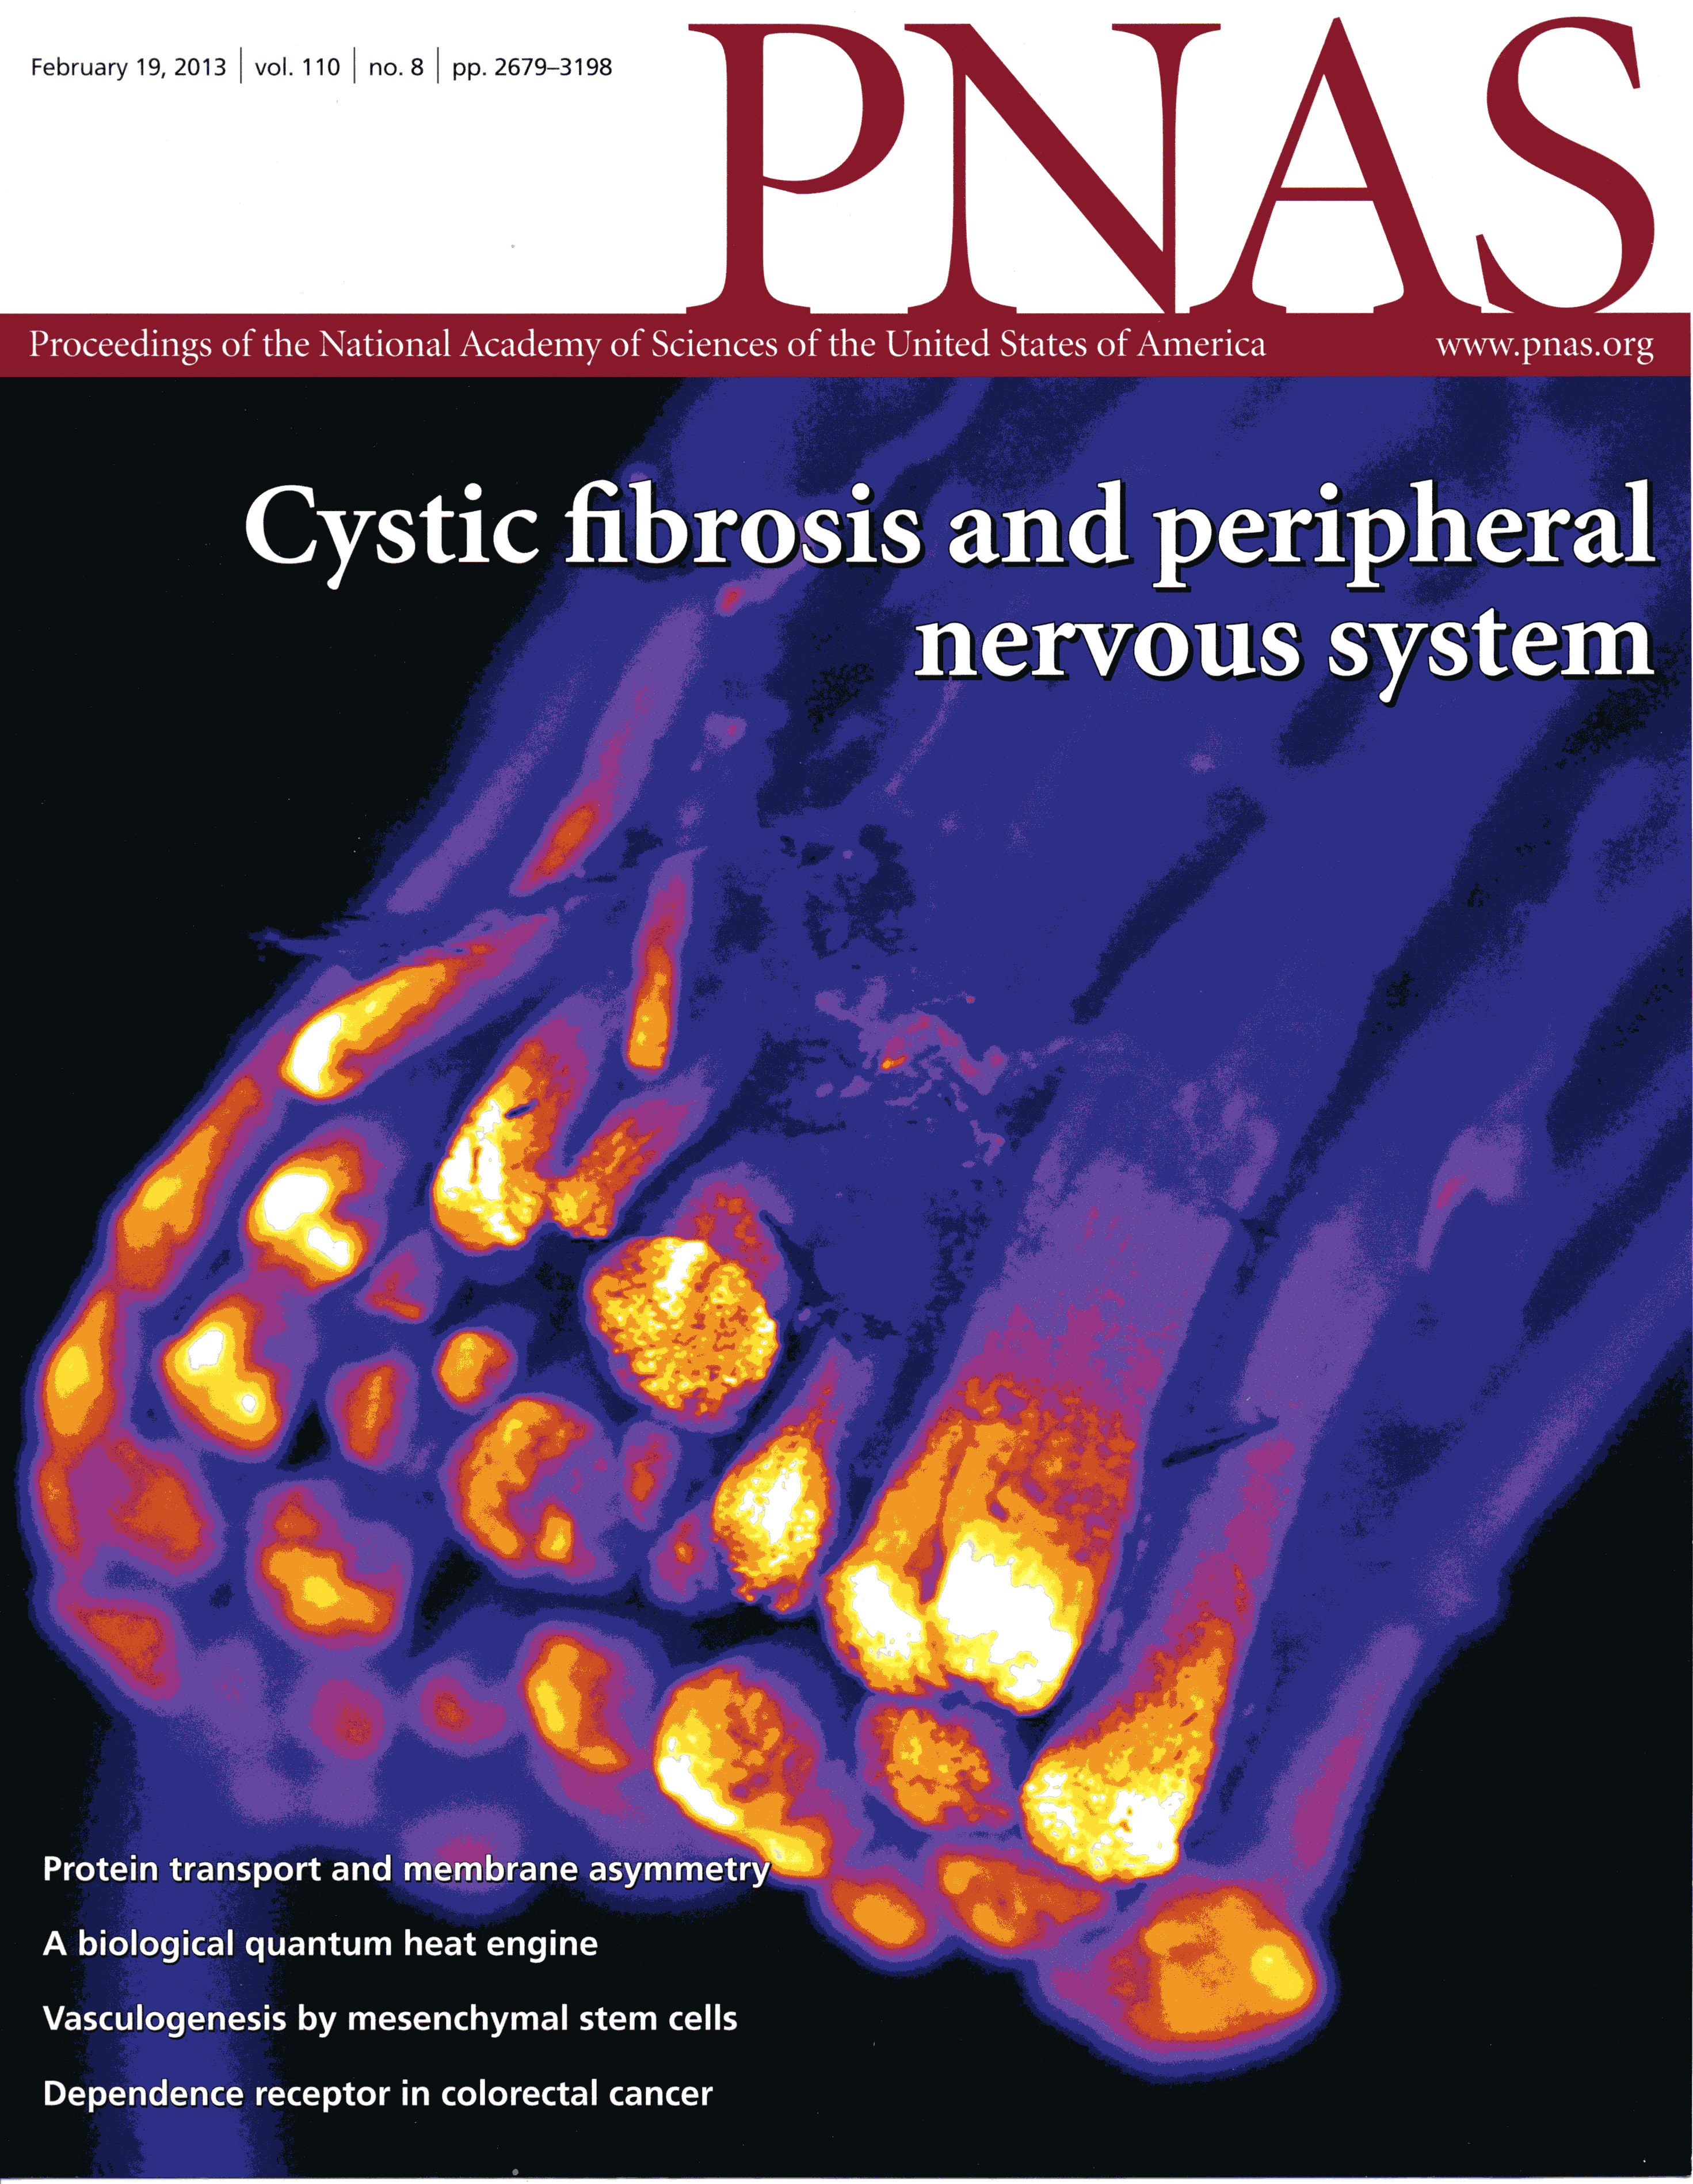 cystic fibrosis and peripheral nervious system